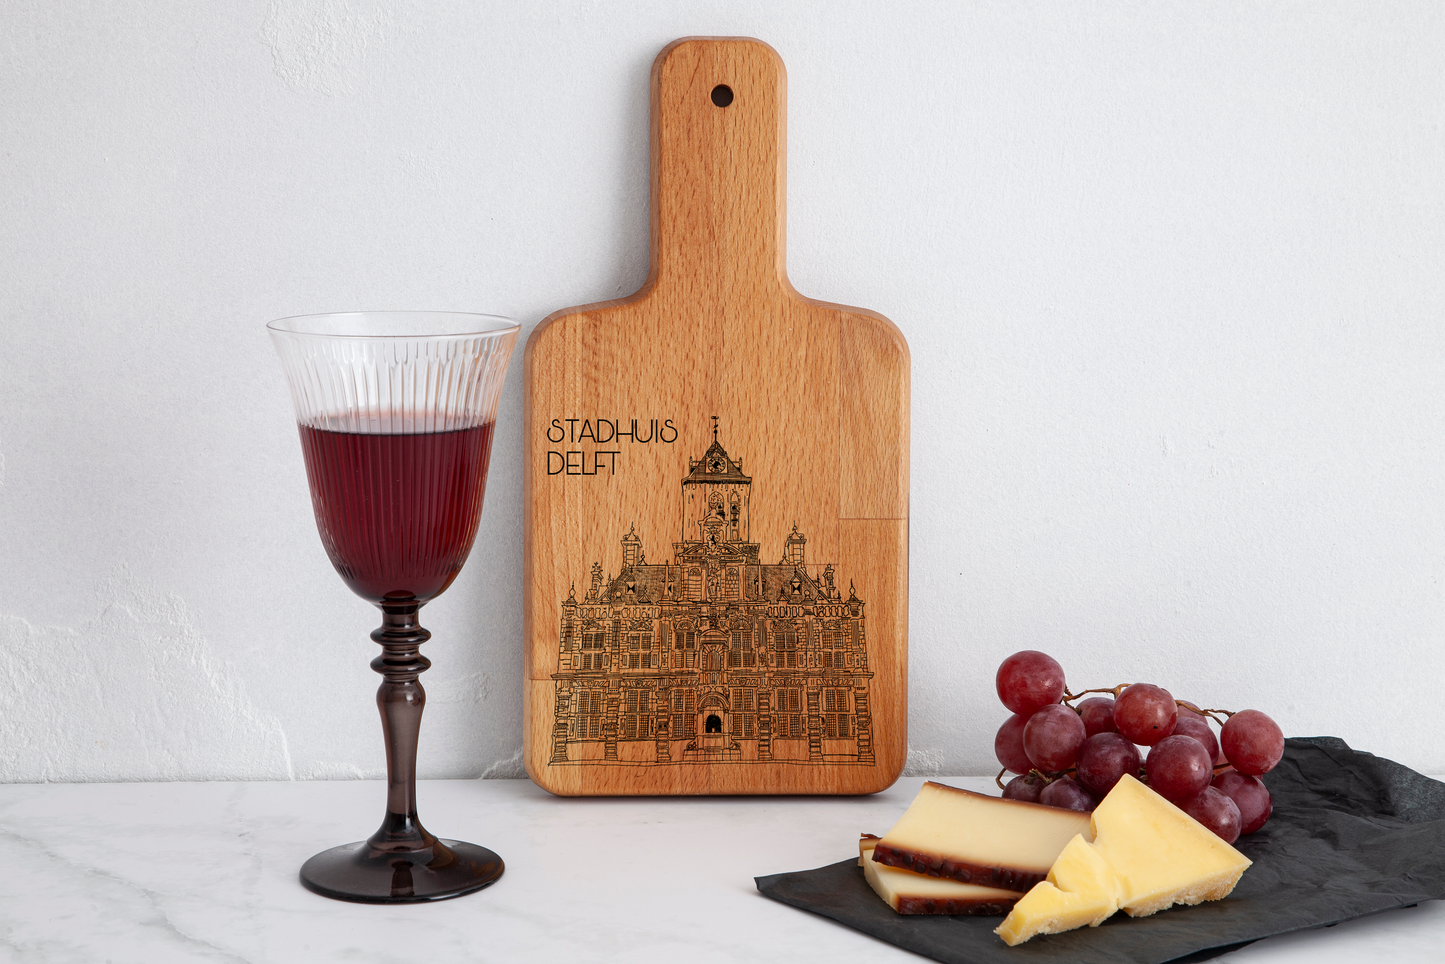 DELFT STUDHUIS CHEESE BOARD